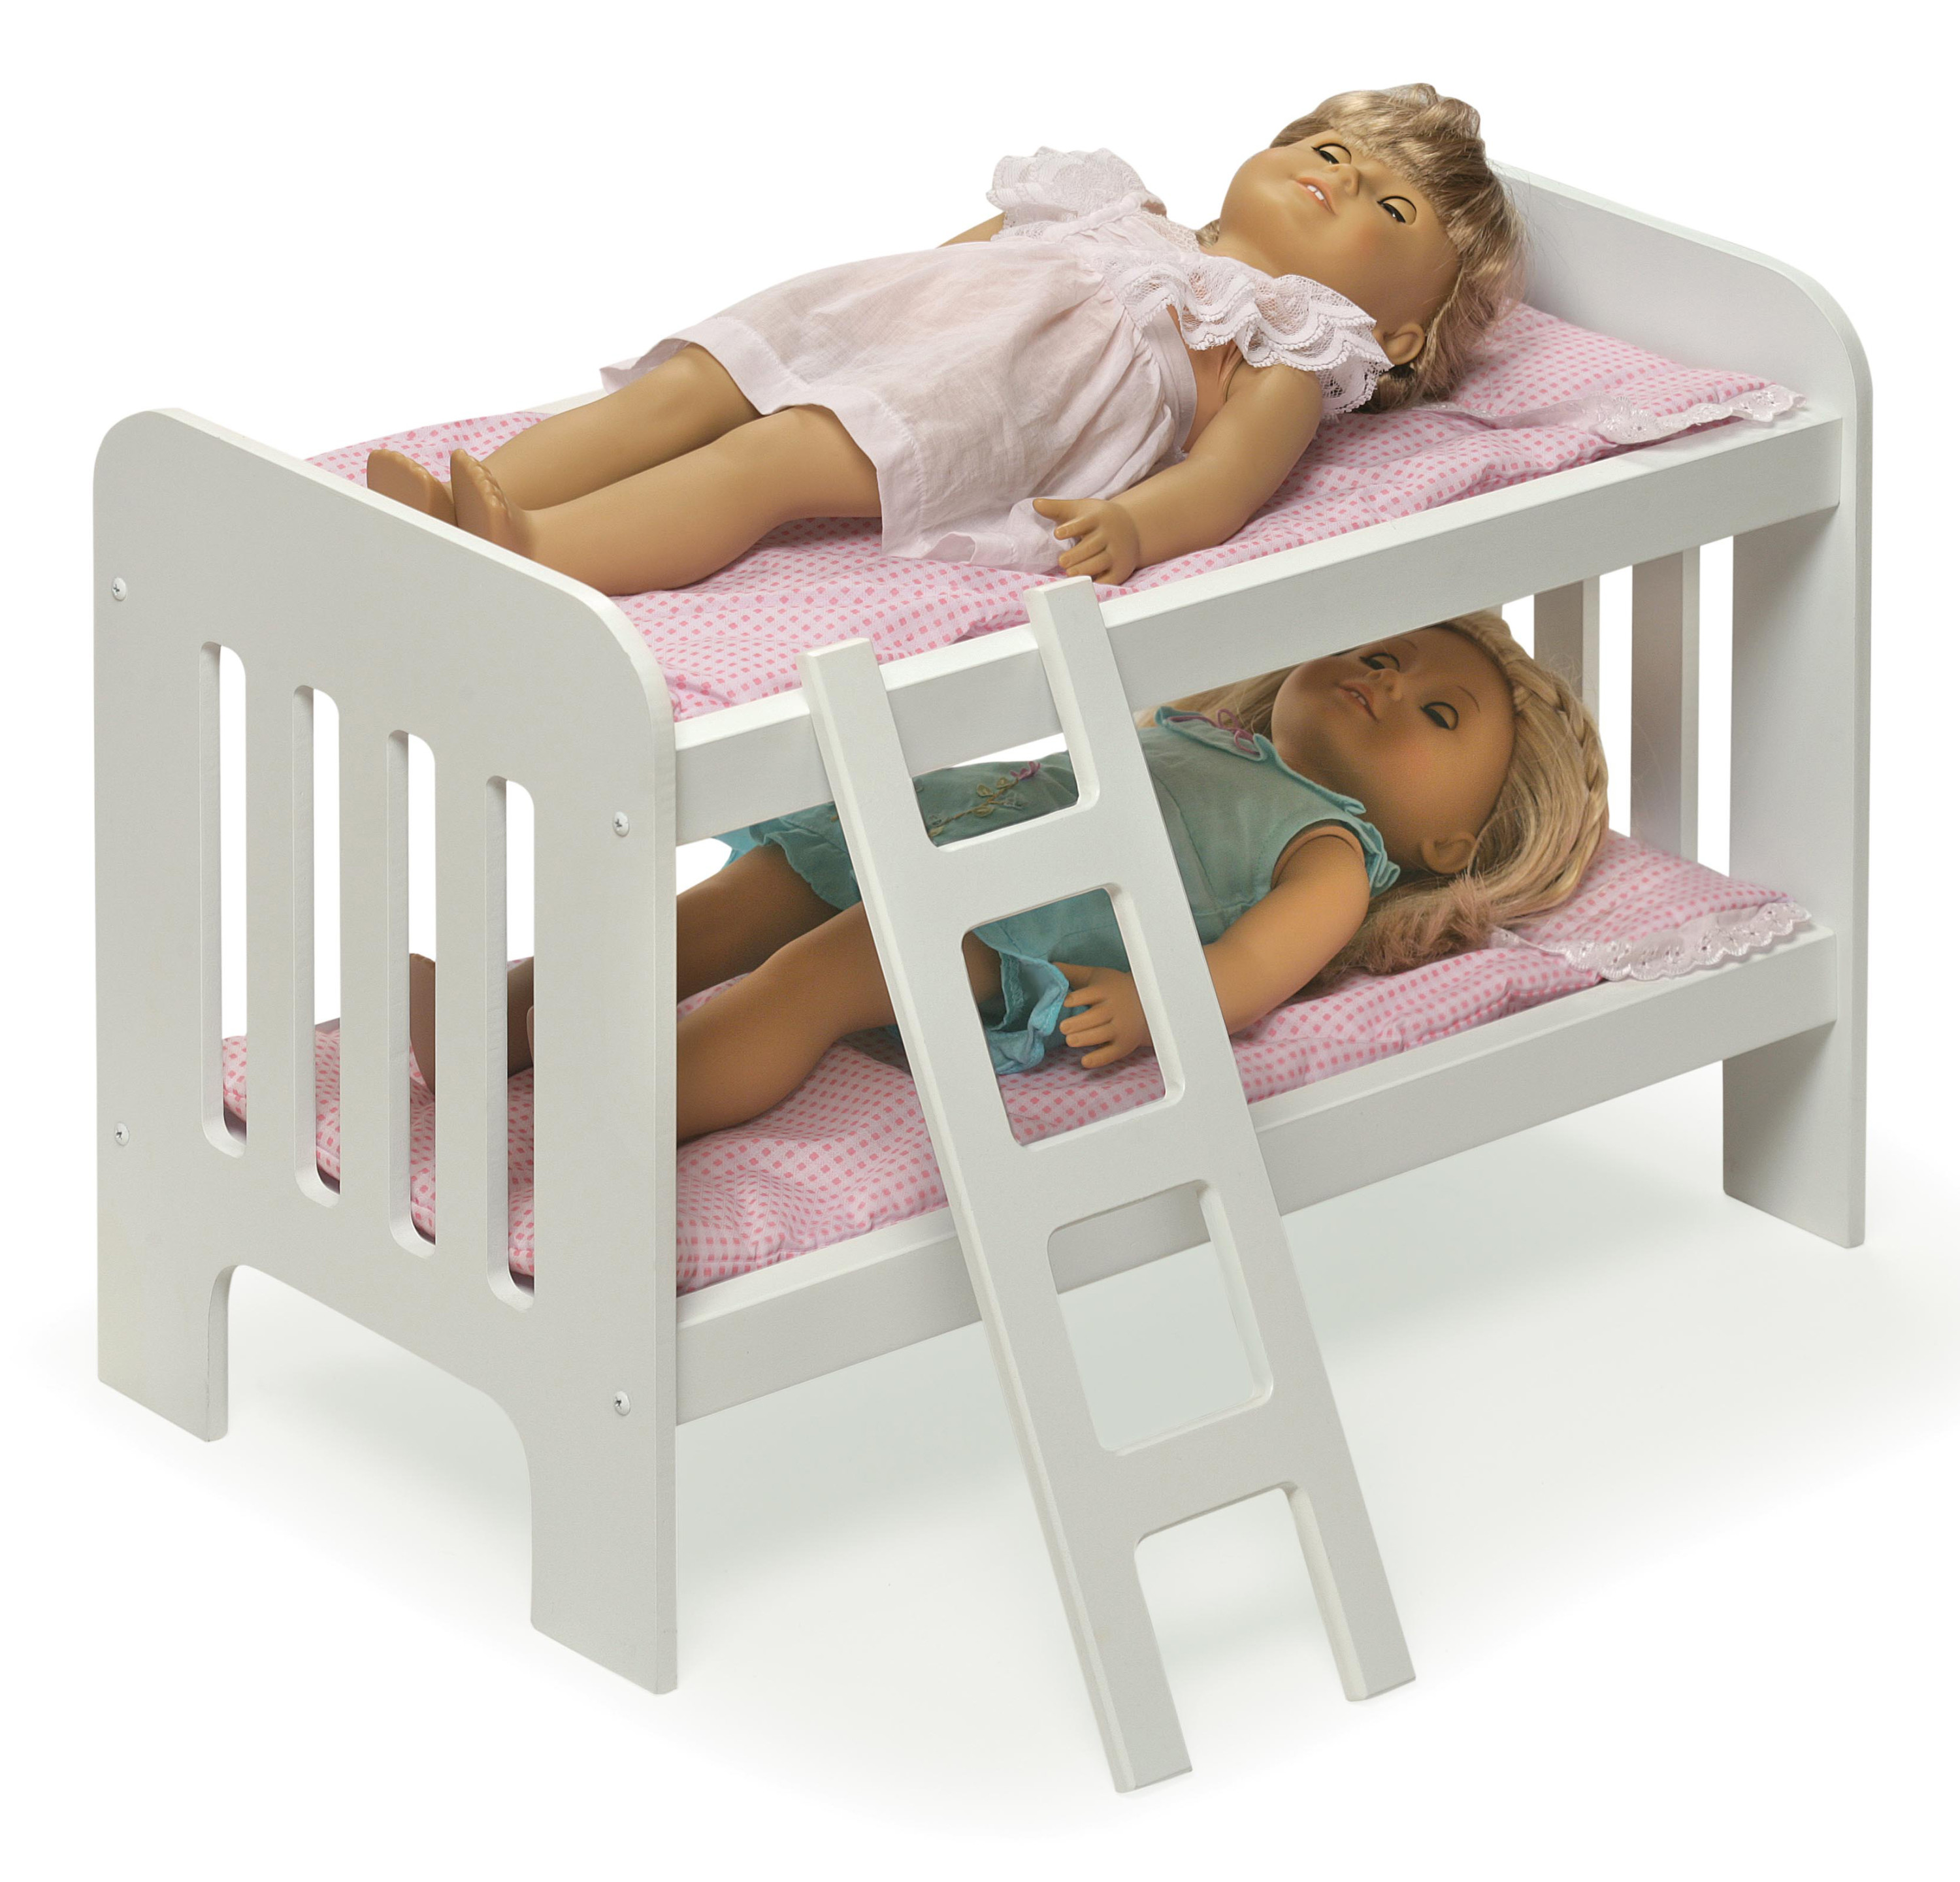 Badger Basket Doll Bunk Bed with Bedding, Ladder, and Free Personalization Kit - White/Pink/Gingham - image 5 of 11